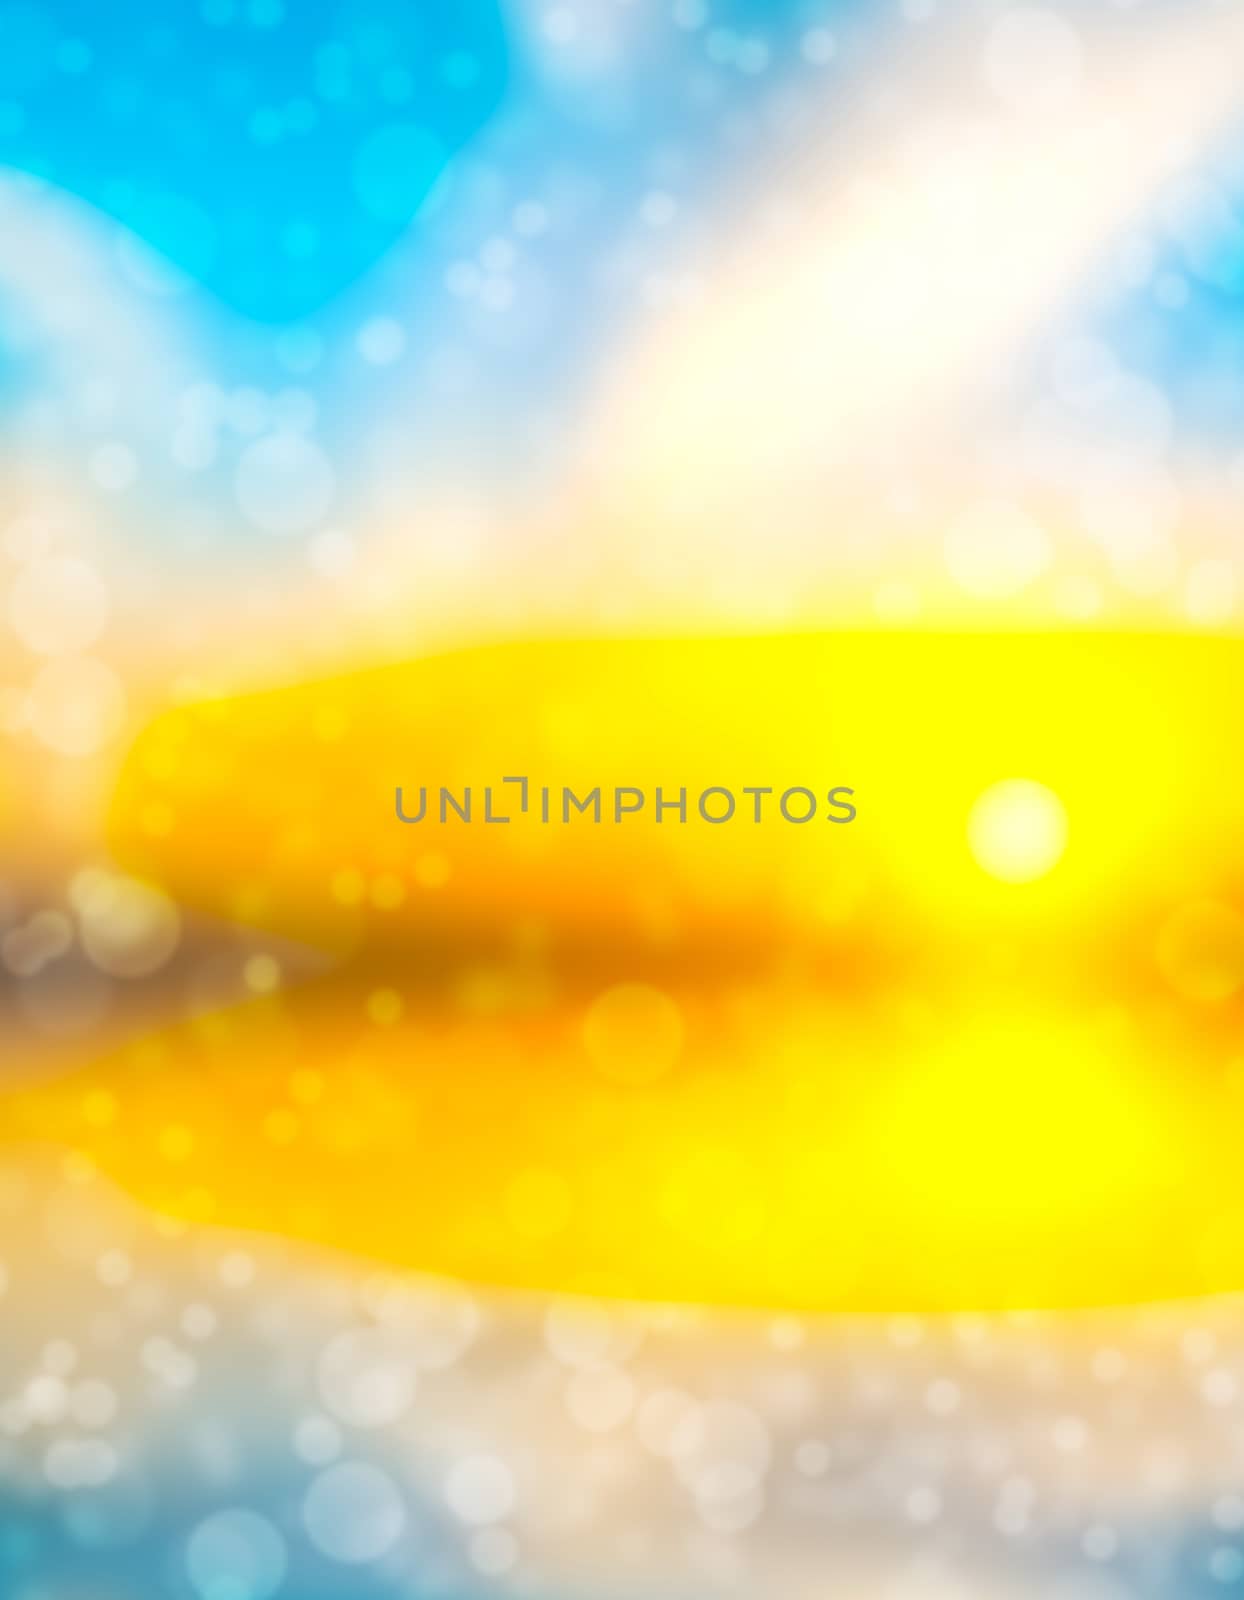 Colorful of soft and blurred bokeh background.